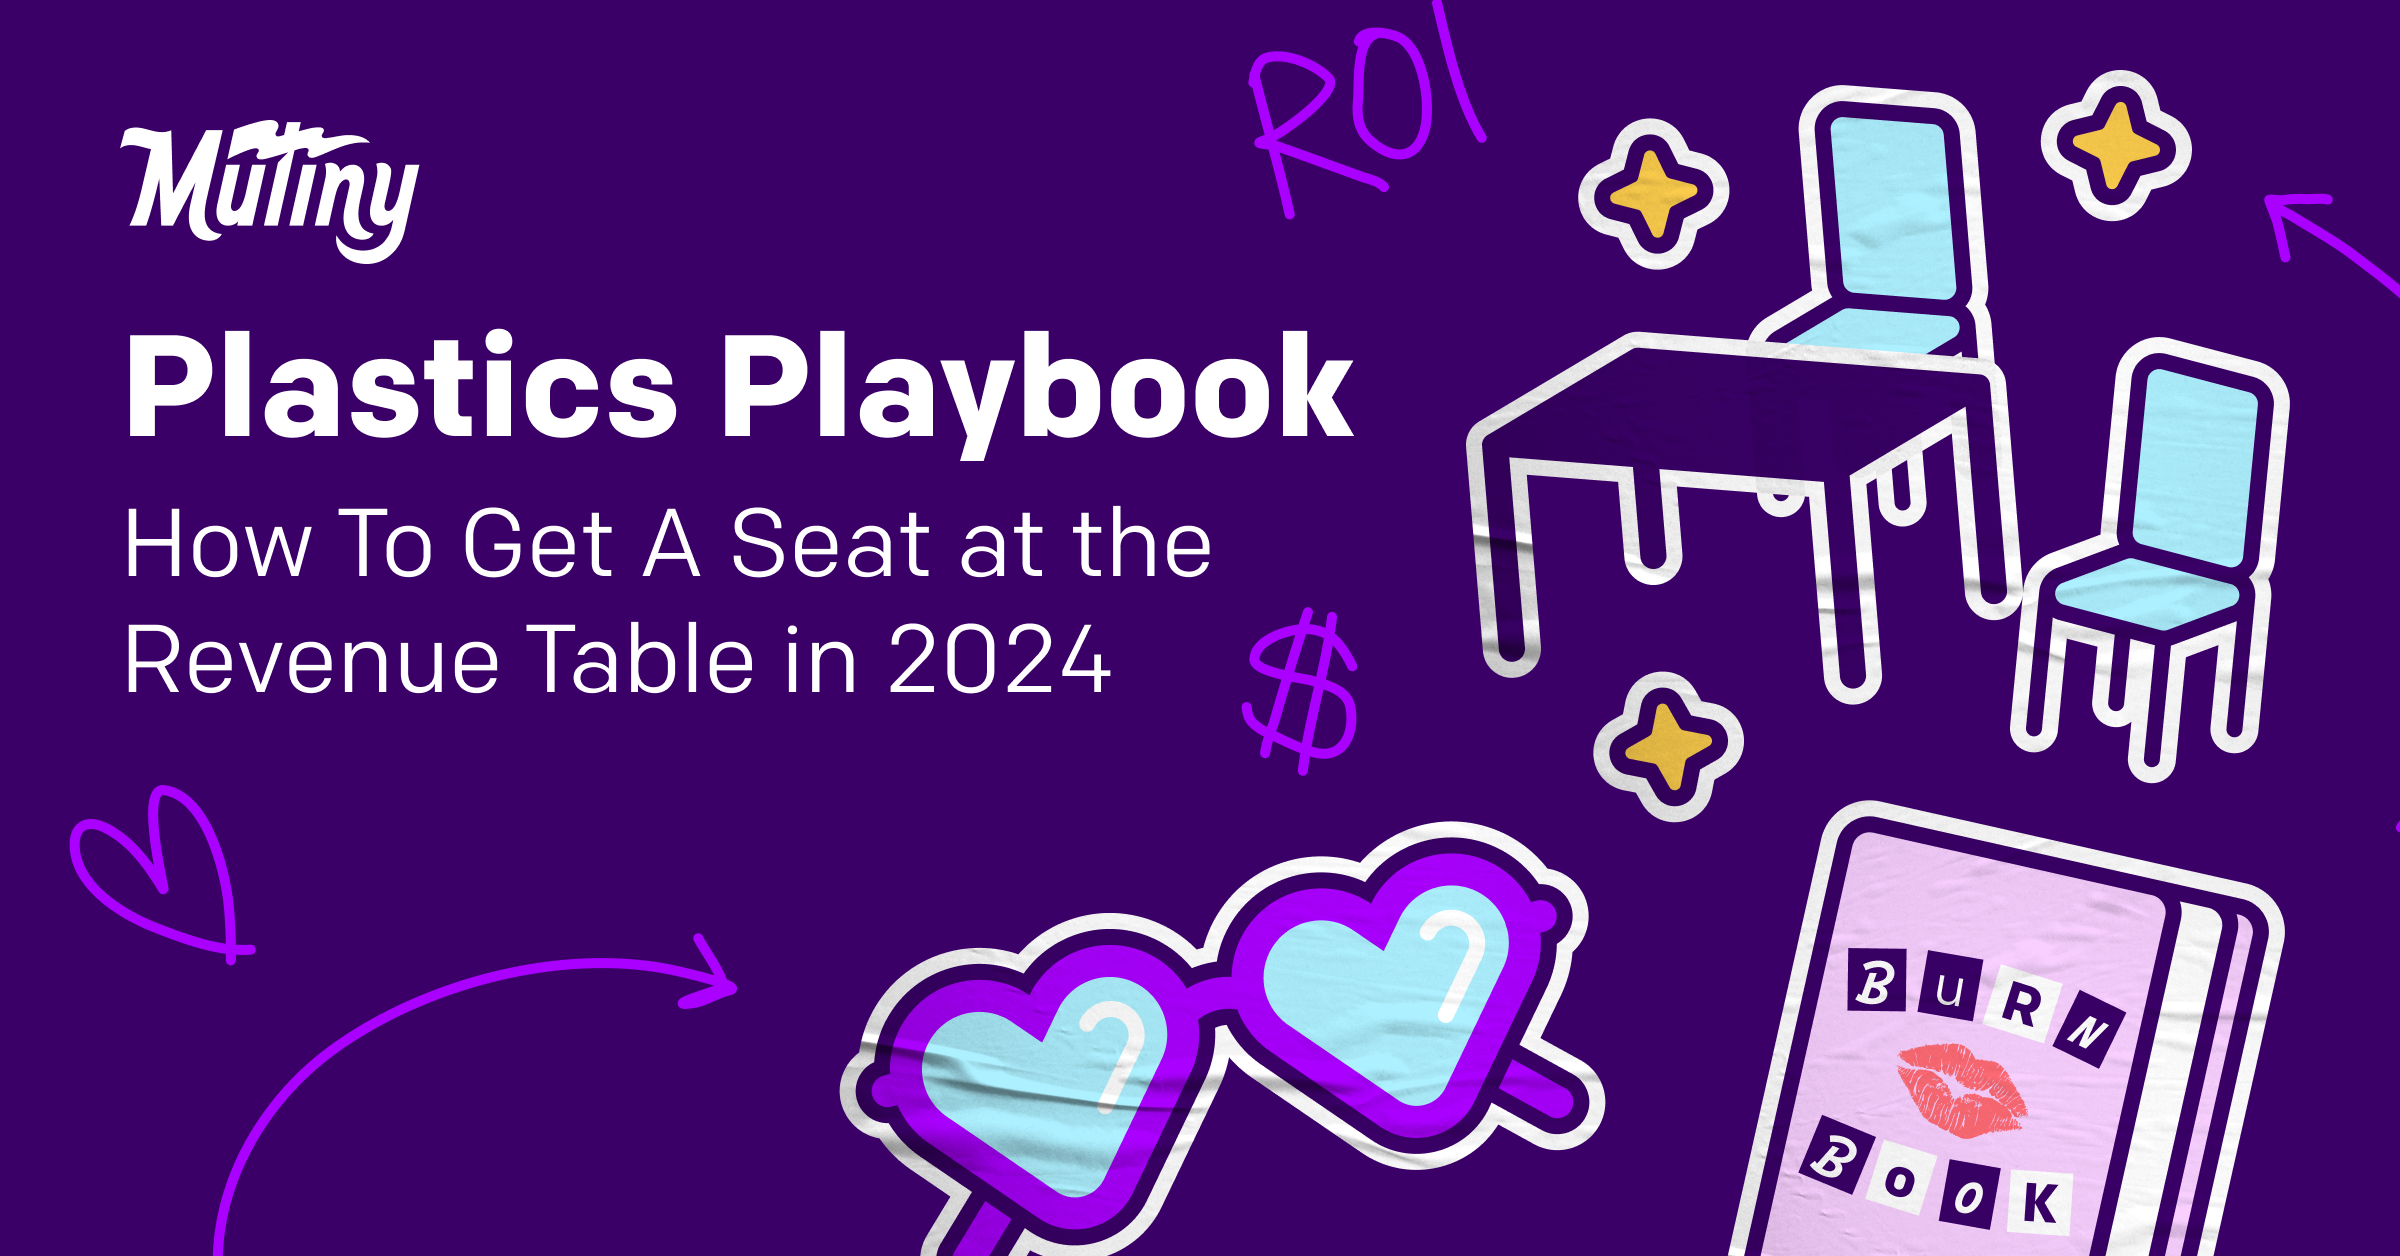 Plastics Playbook: How To Get A Seat At The Revenue Table in 2024